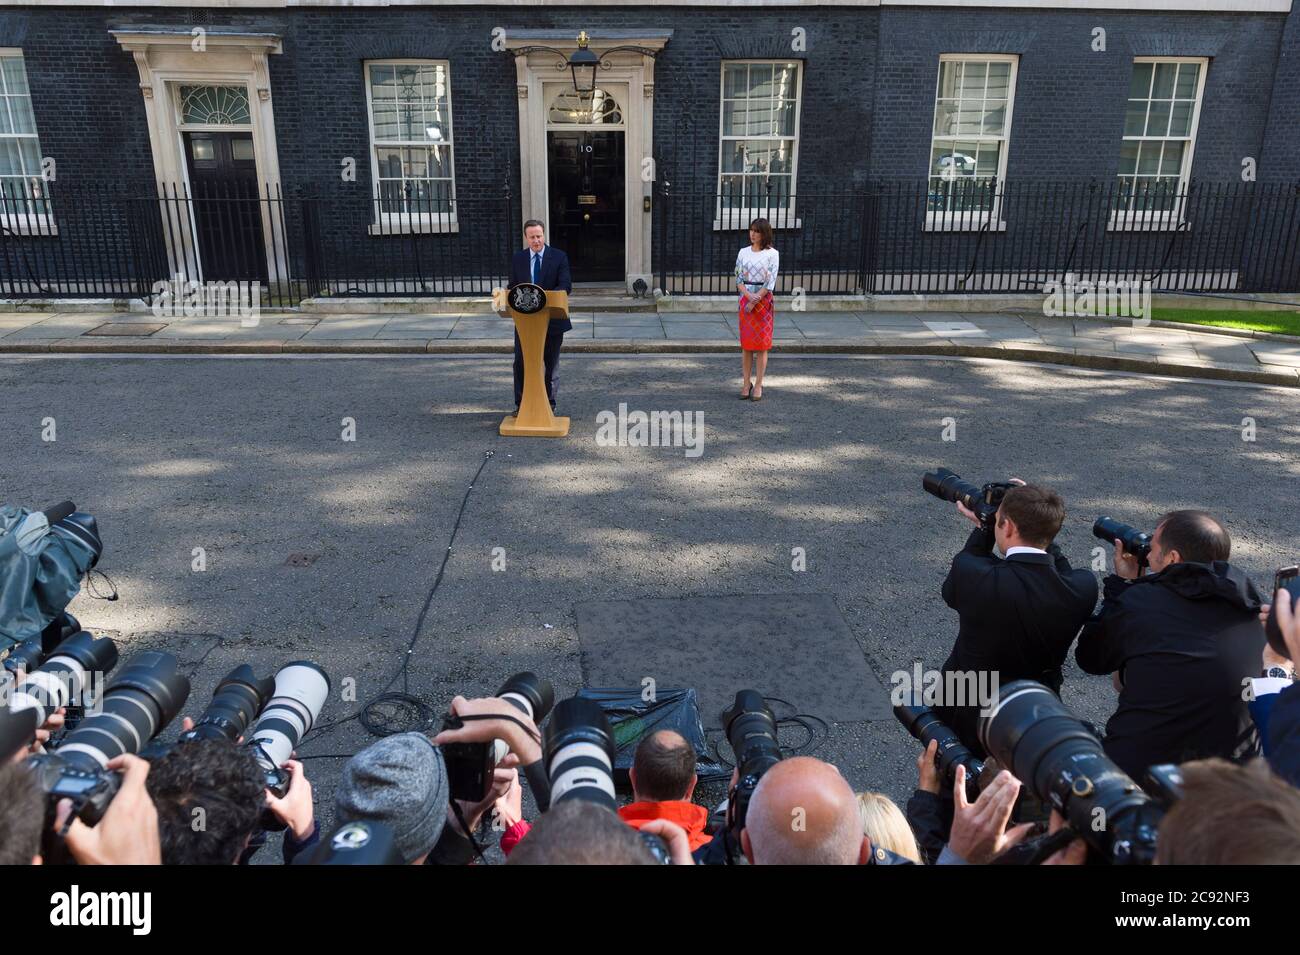 British Prime Minister David Cameron with his wife Samantha, announcing he’ll be resigning as Prime Minster, after Britain voted to leave the European Union, in yesterdays referendum, outside, 10 Downing Street, London, UK.  24 Jun 2016 Stock Photo